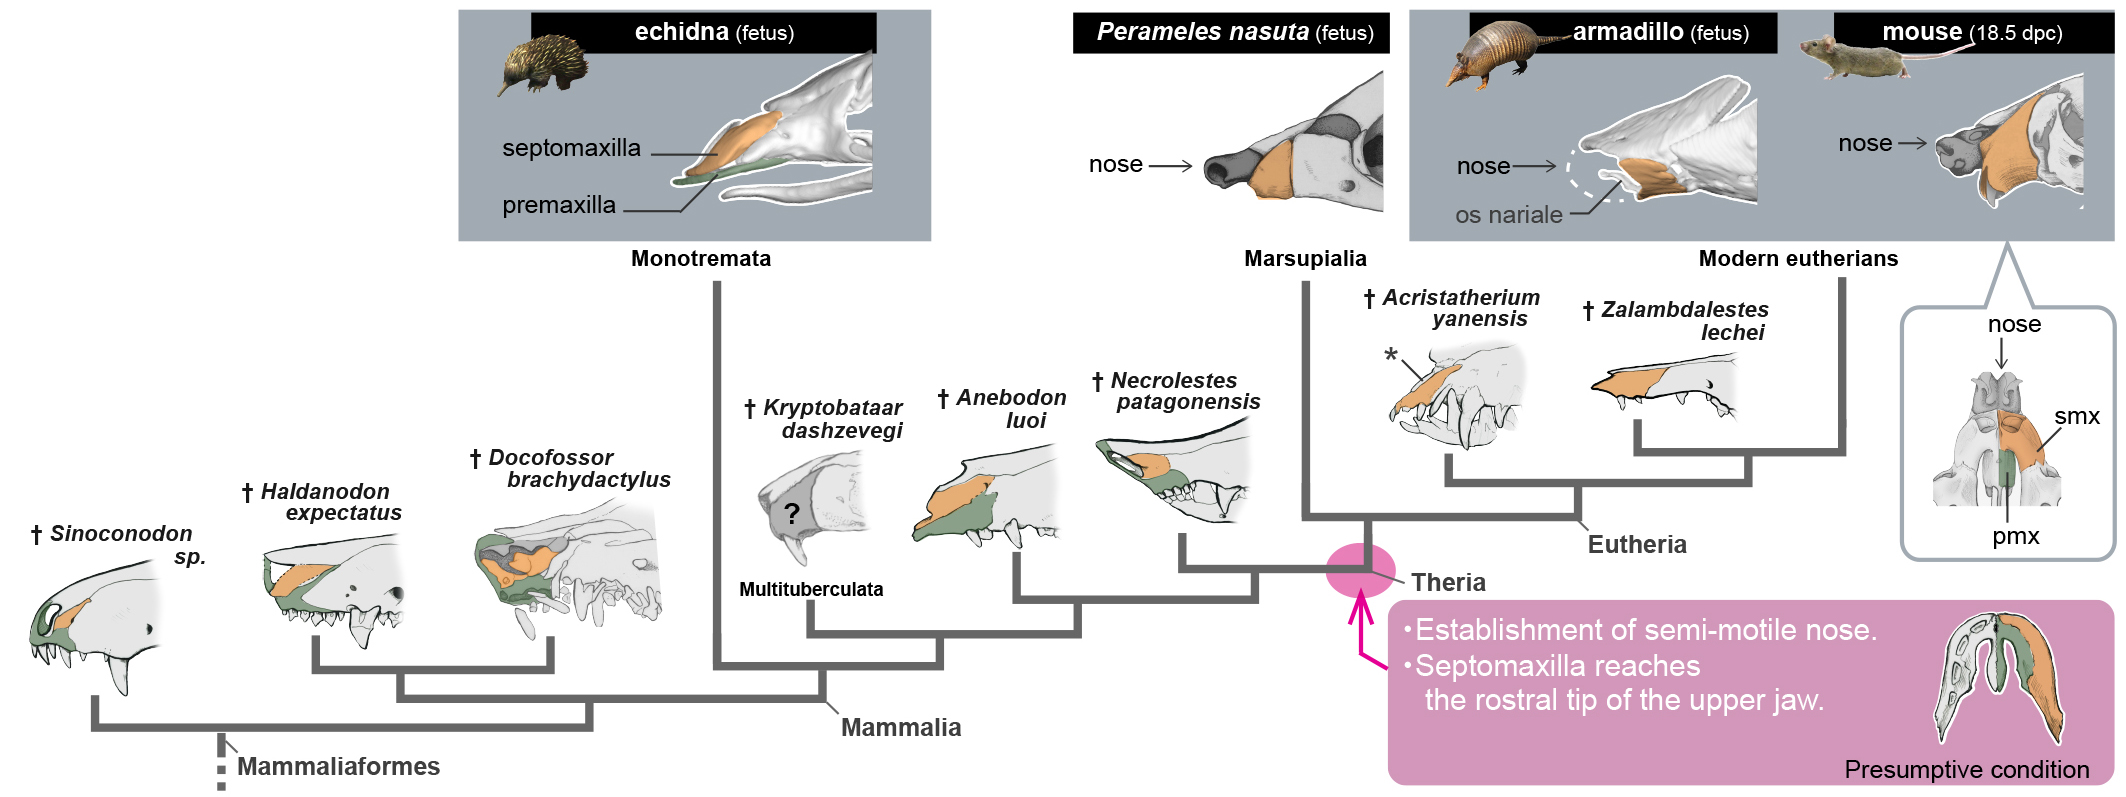 Illustration of the transition of upper jaw bones in the Mammaliaformes, an evolutionary grouping that includes living and extinct mammal species. 